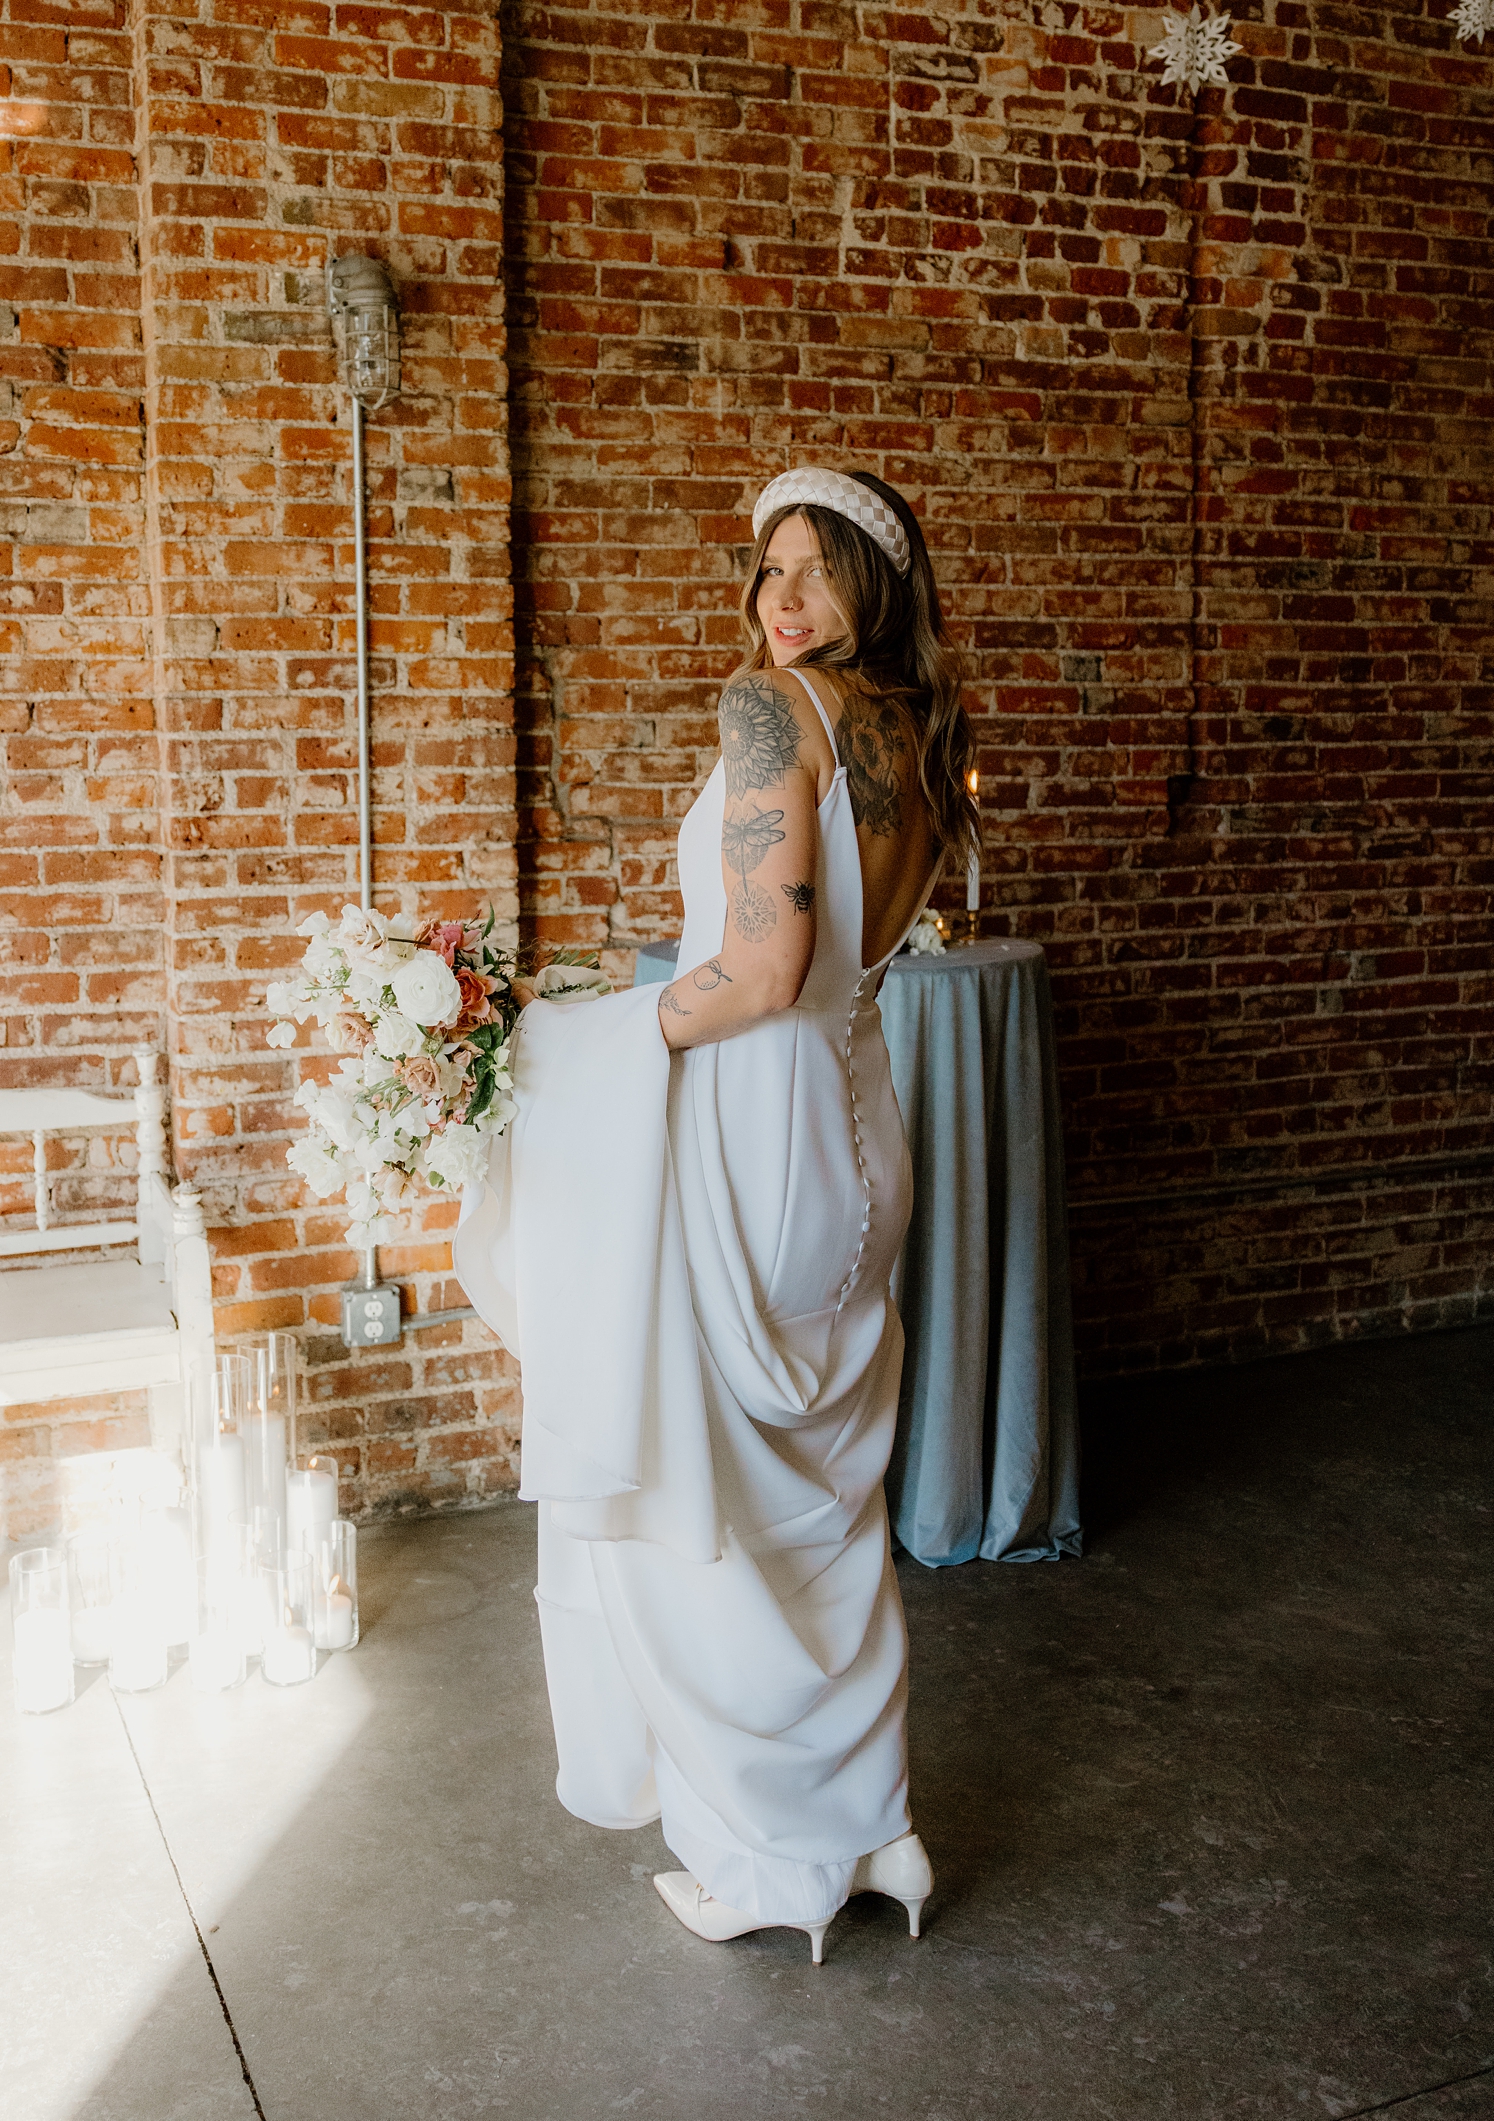 Bride looking over her shoulder while holding dress train over her arm | McArthur Weddings and Events